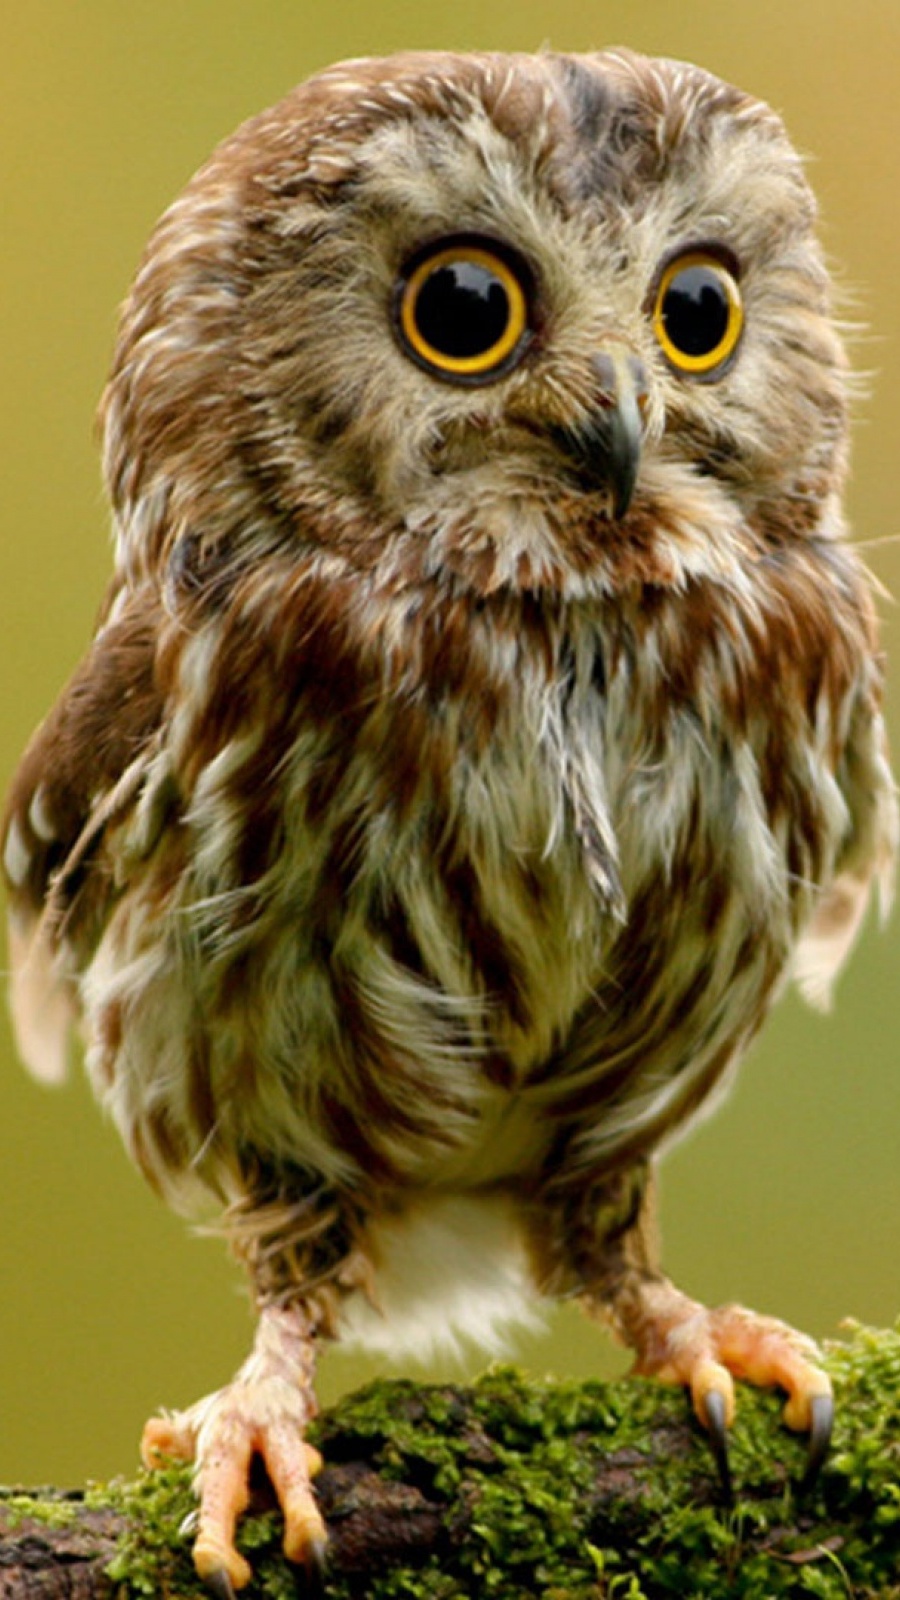 Owl Wallpaper For Android - Cute Burrow Owl Baby - HD Wallpaper 